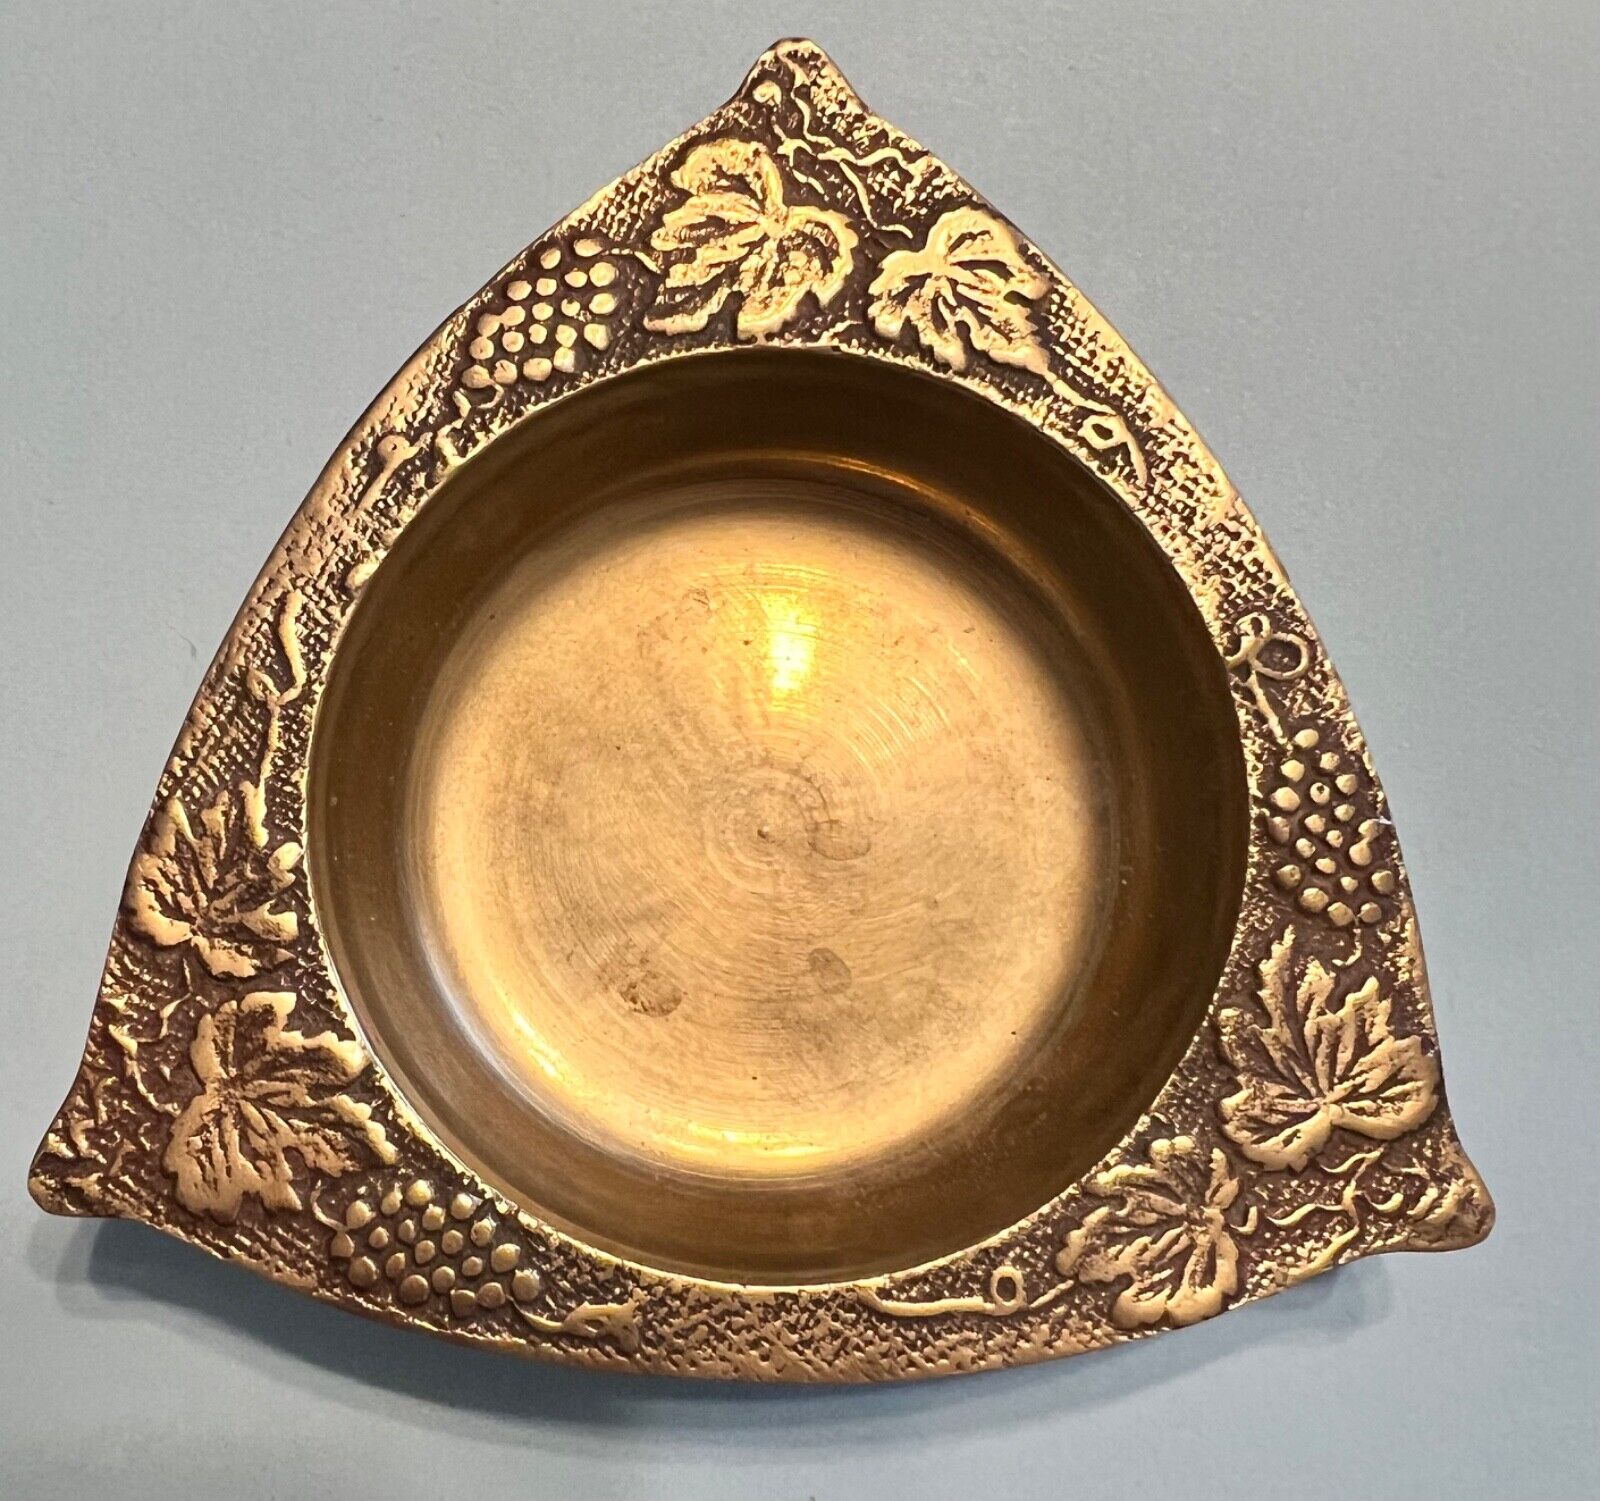 Vintage Solid Brass Tooled TRAY/ASHTRAY Made in Korea Approximately 4.5” x 4.5”